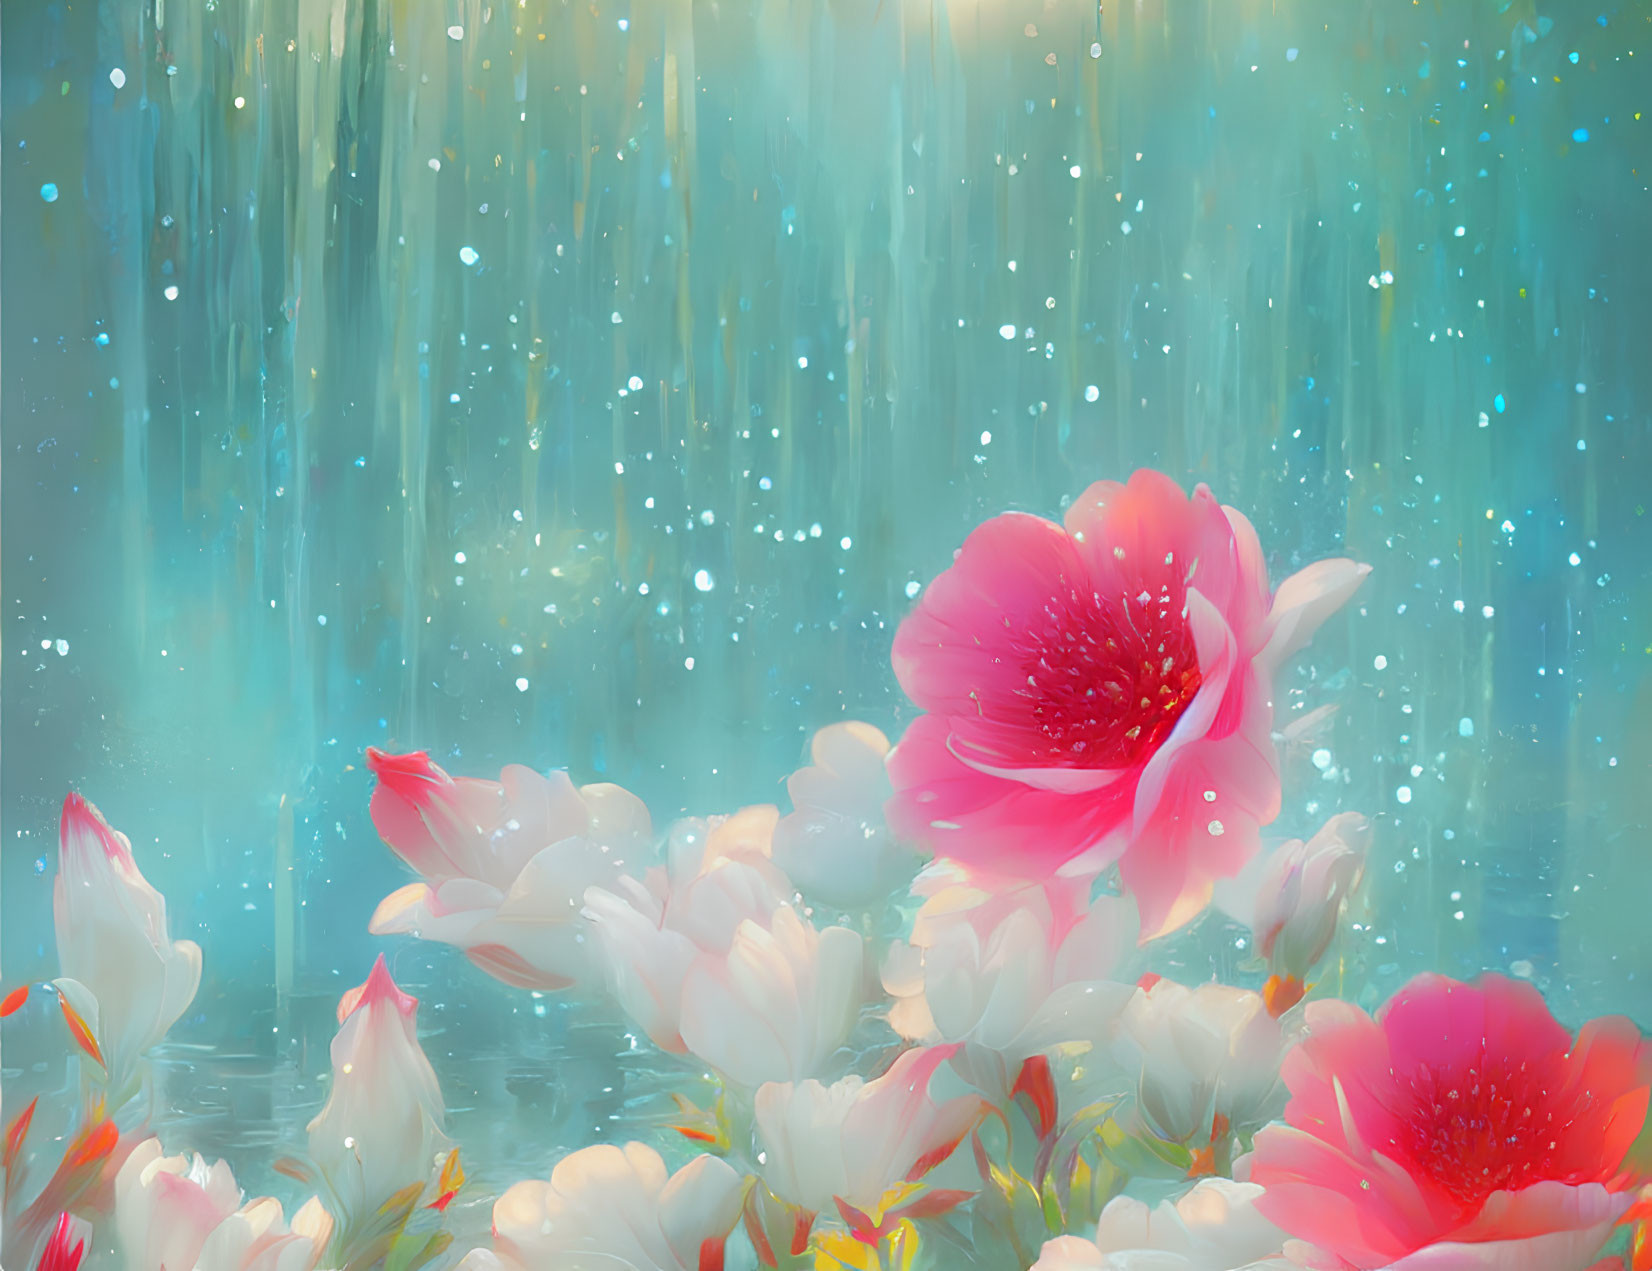 Vibrant pink flowers in misty forest with glittering rain